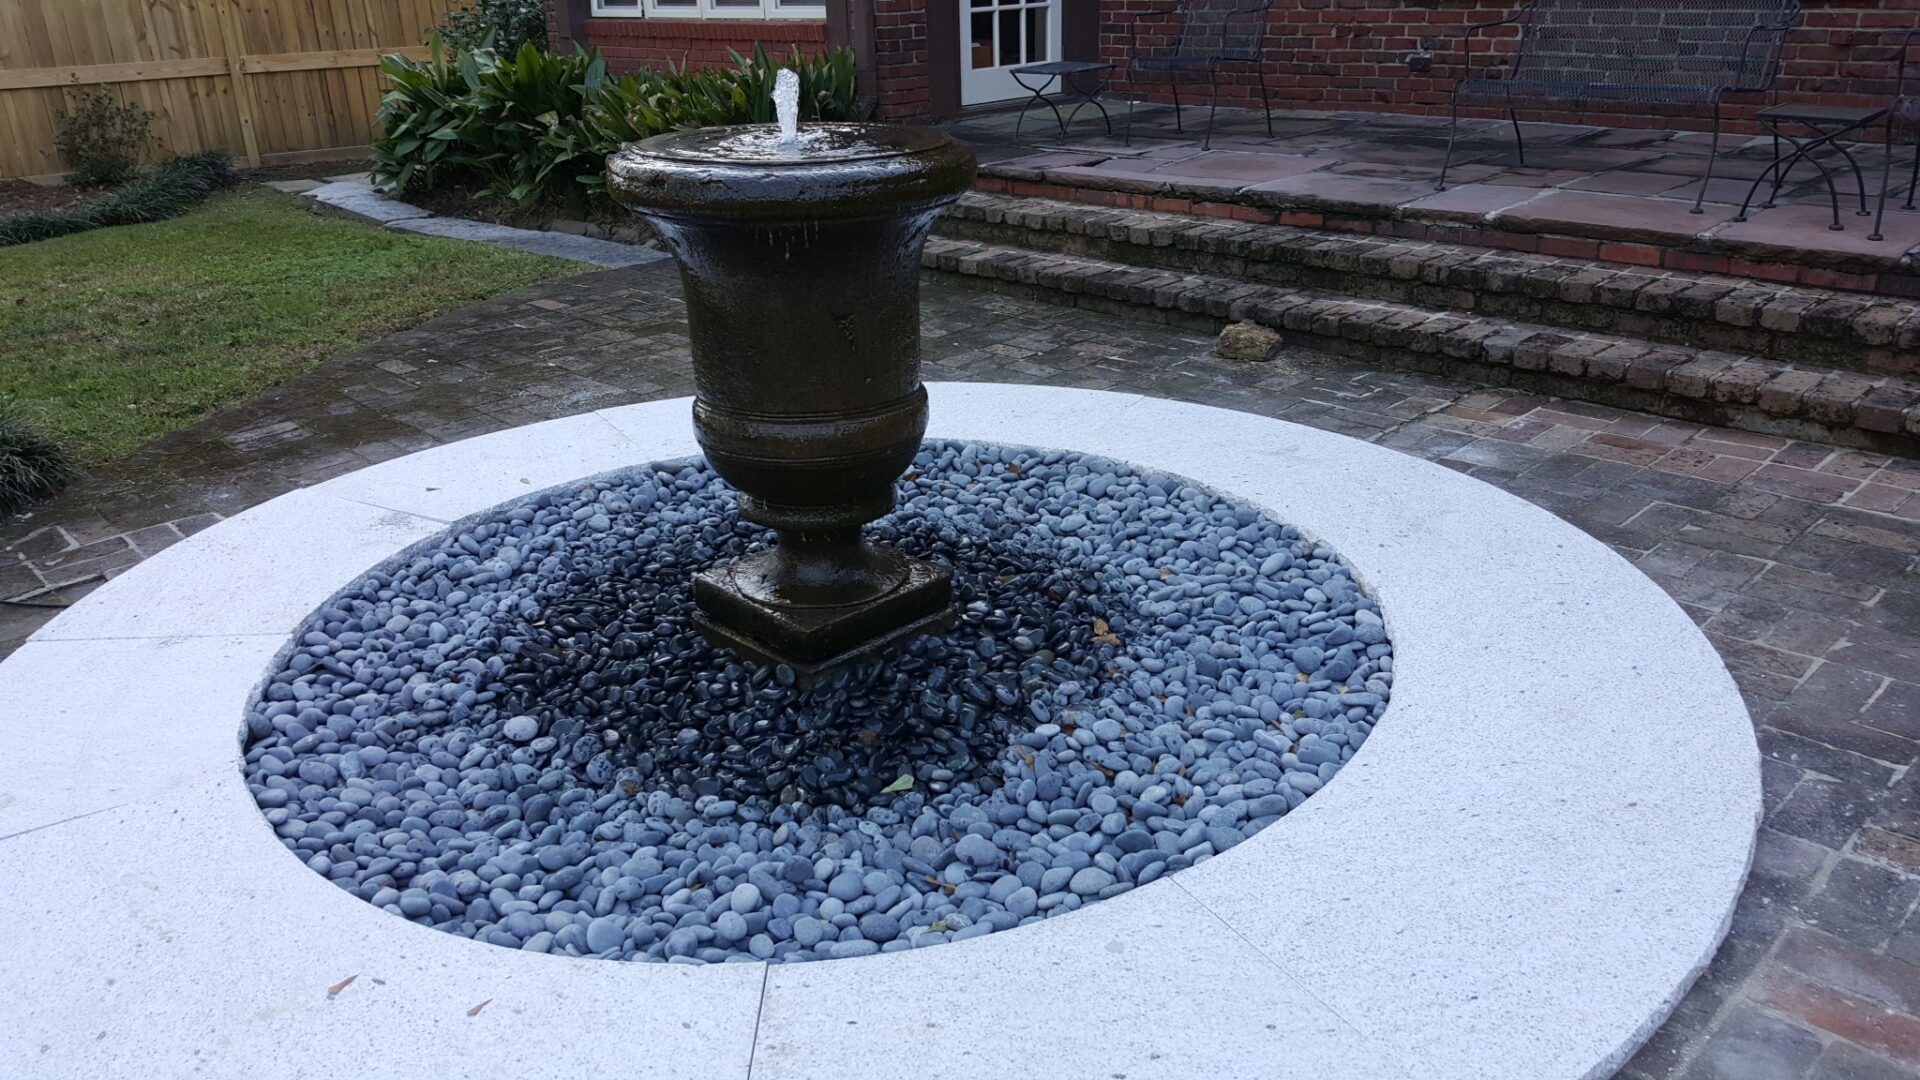 A fountain in the middle of a circular area.